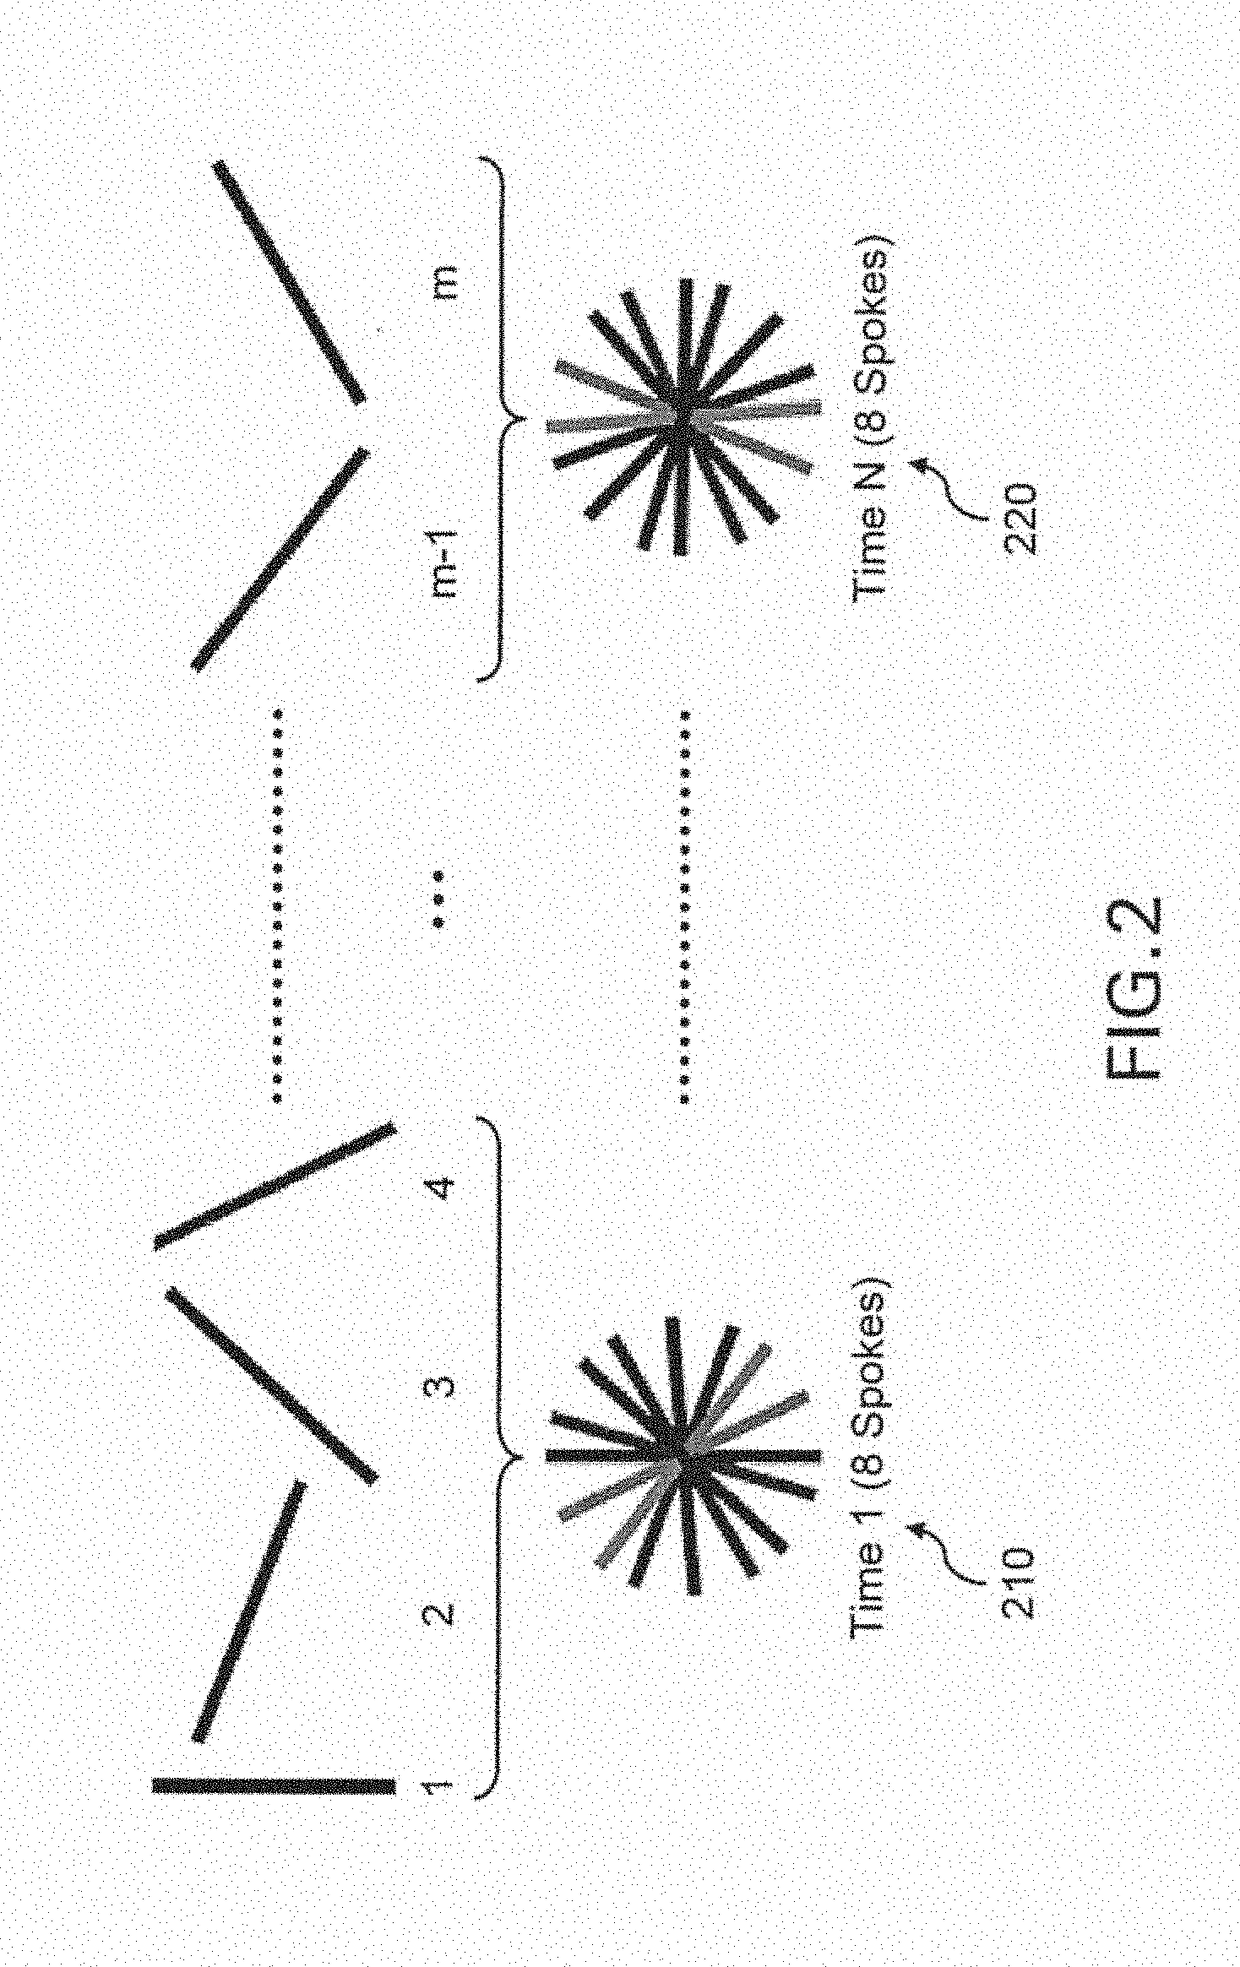 System, method and computer-accessible medium for highly-accelerated dynamic magnetic resonance imaging using golden-angle radial sampling and compressed sensing